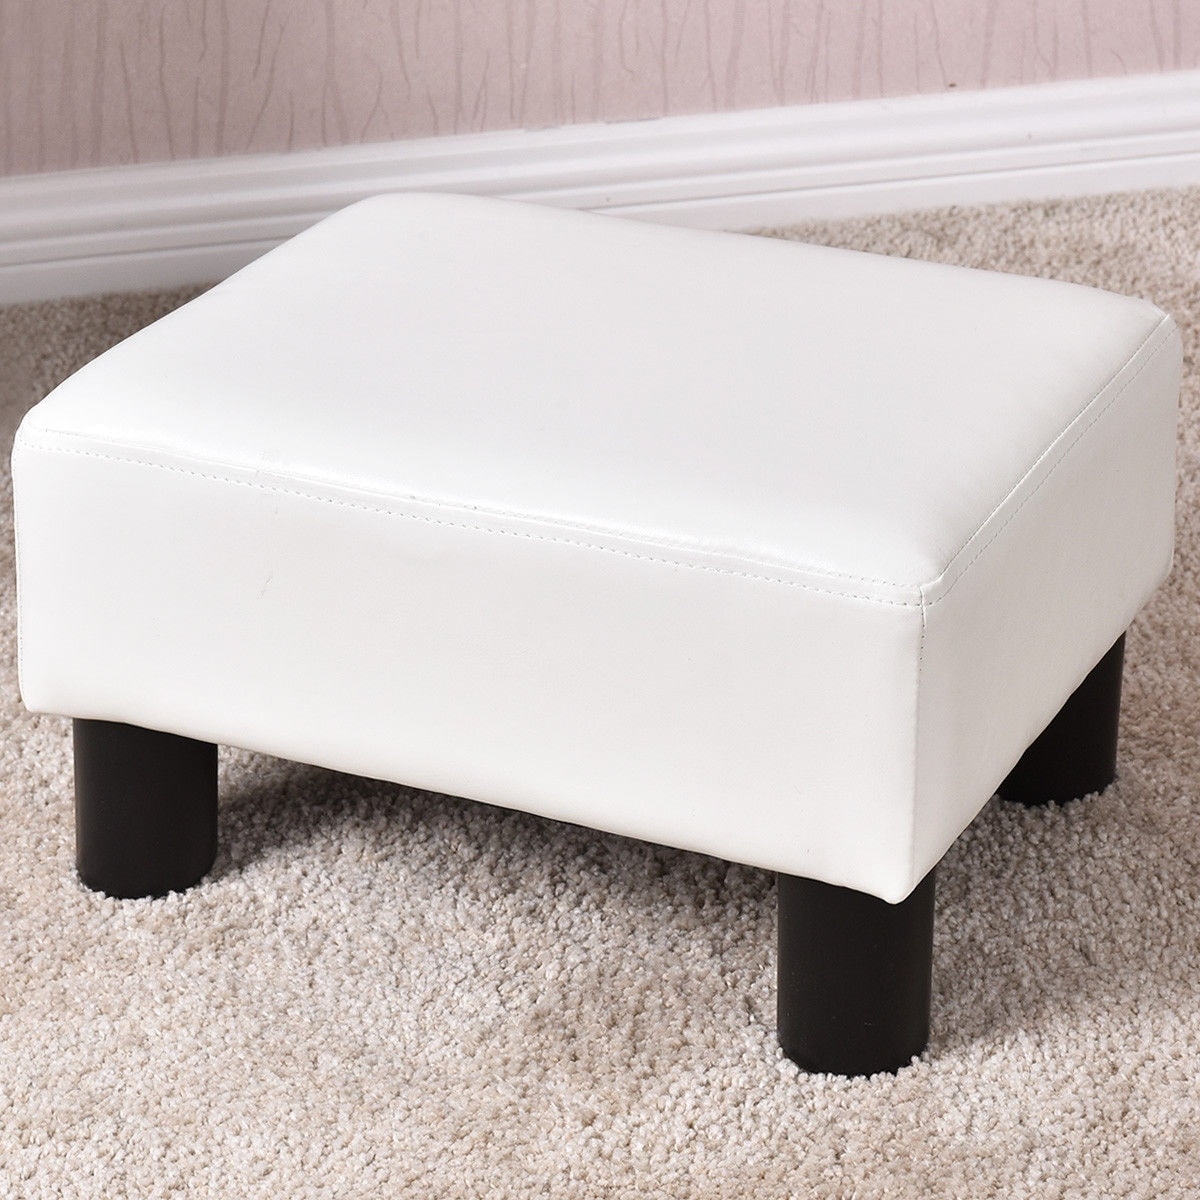 Costway Small Ottoman Footrest PU Leather Footstool Rectangular Seat - White